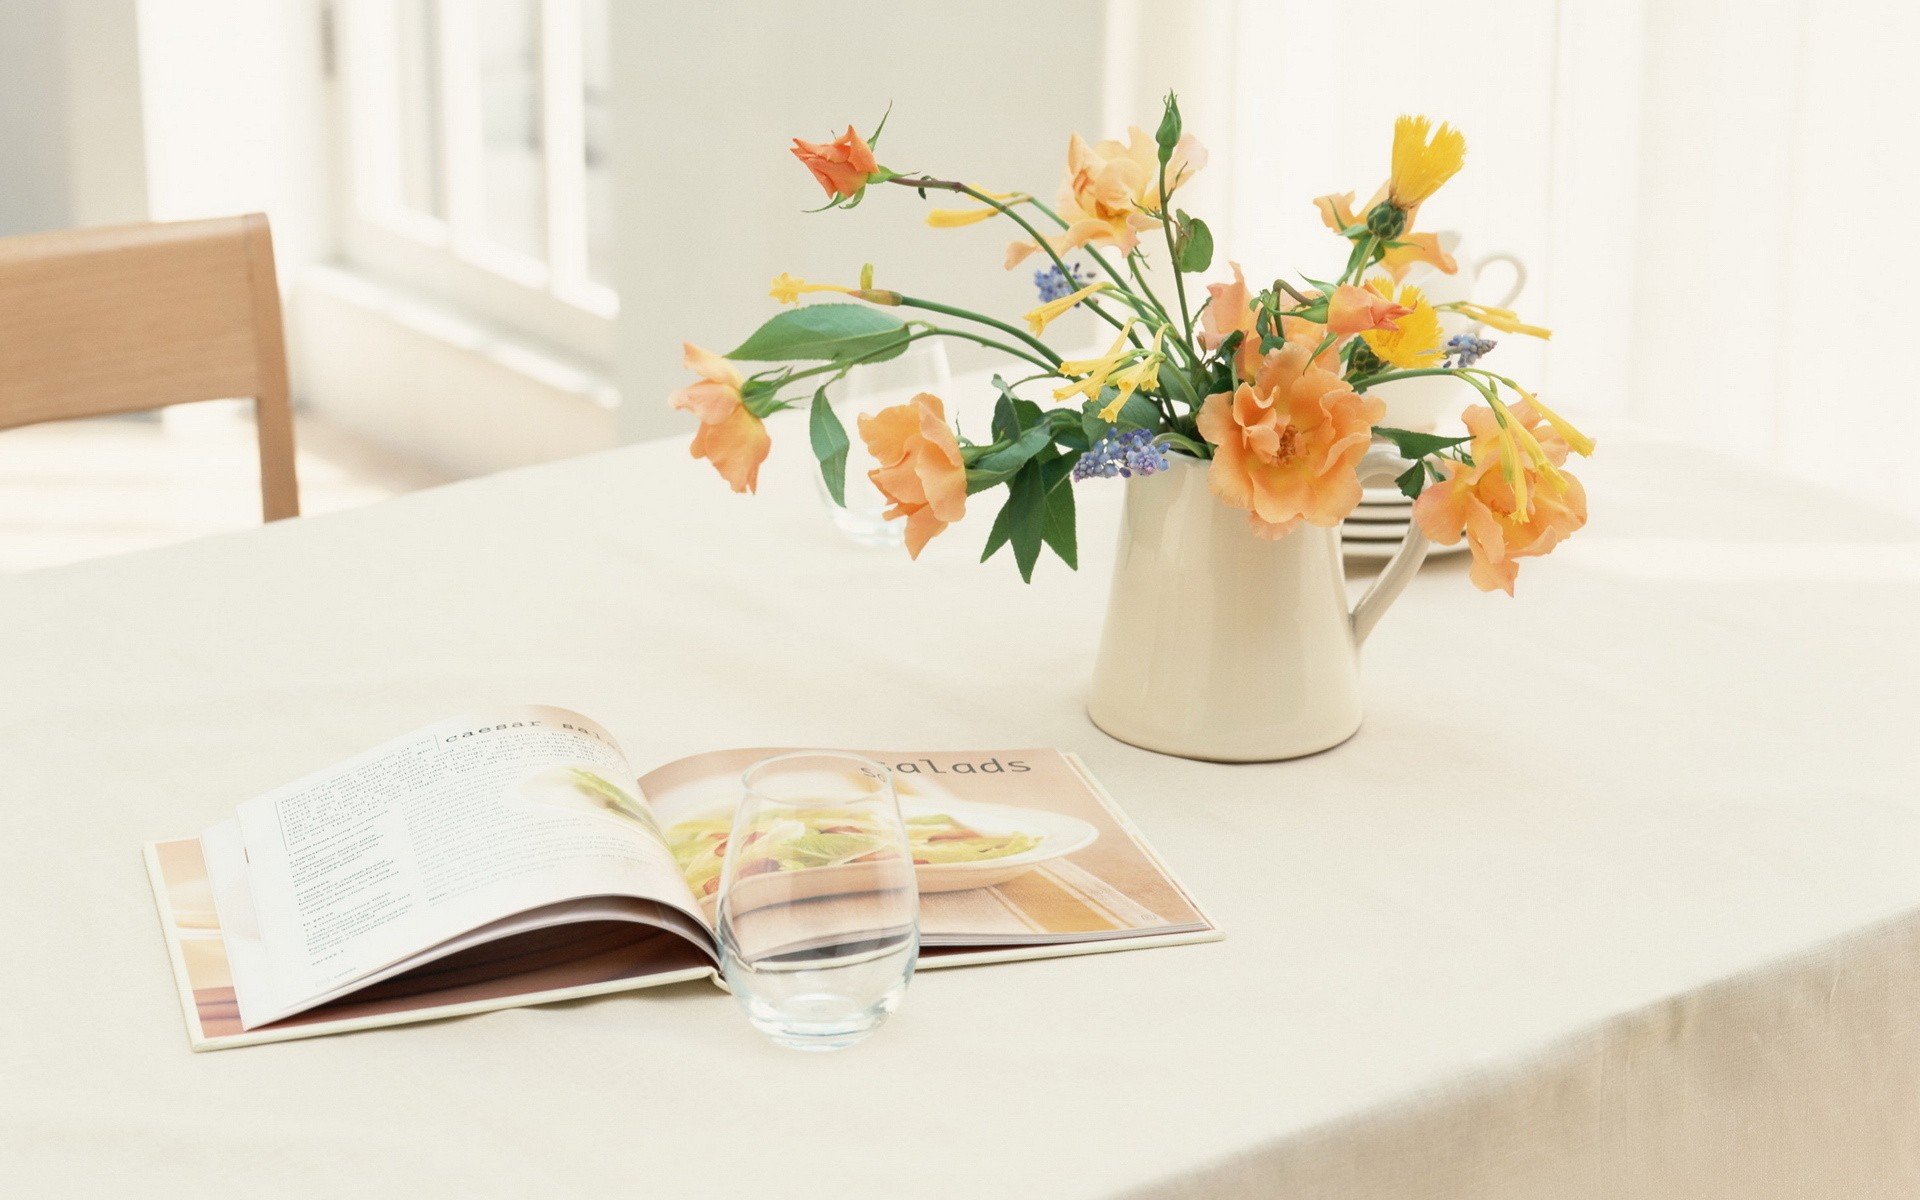 General 1920x1200 orange flowers table plants indoors drinking glass books